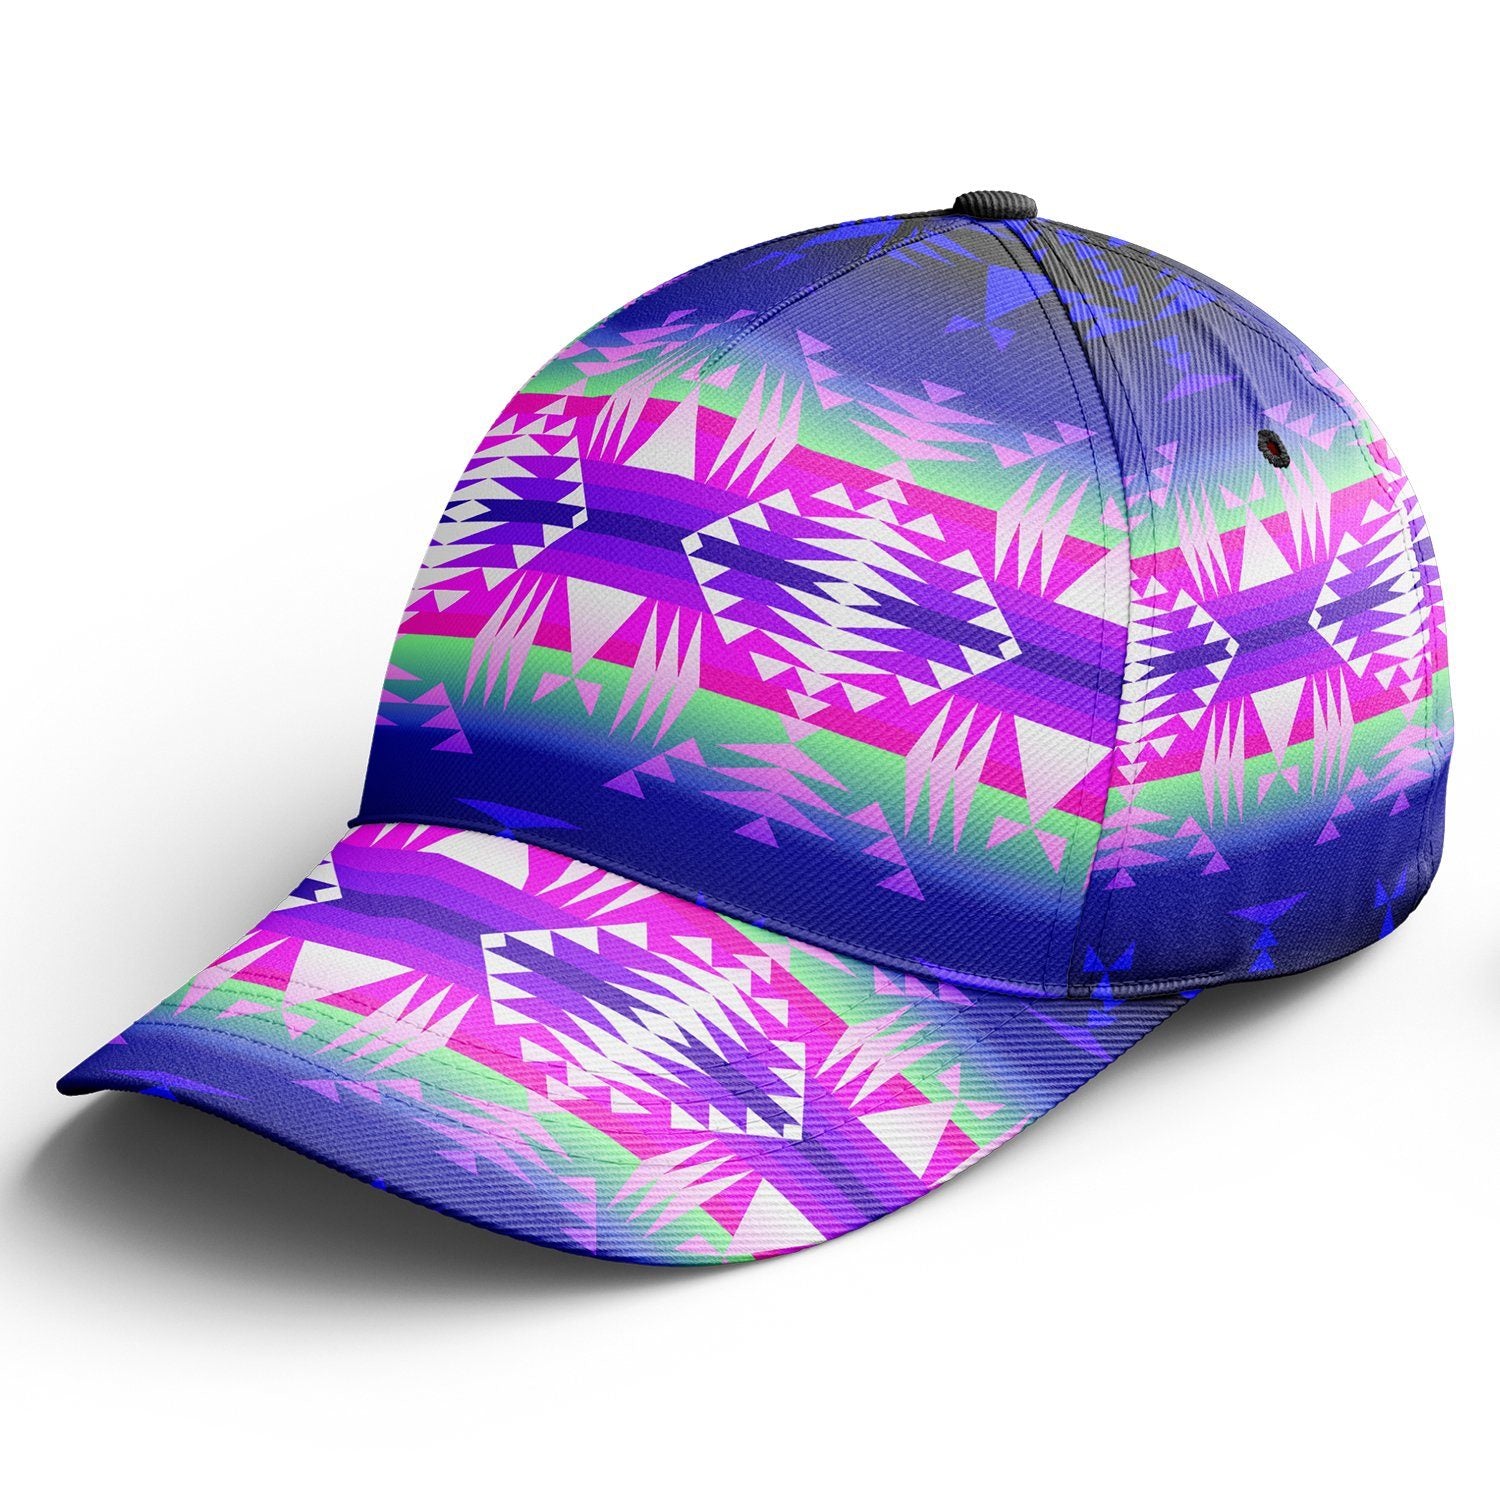 Between the Wasatch Mountains Snapback Hat hat Herman 